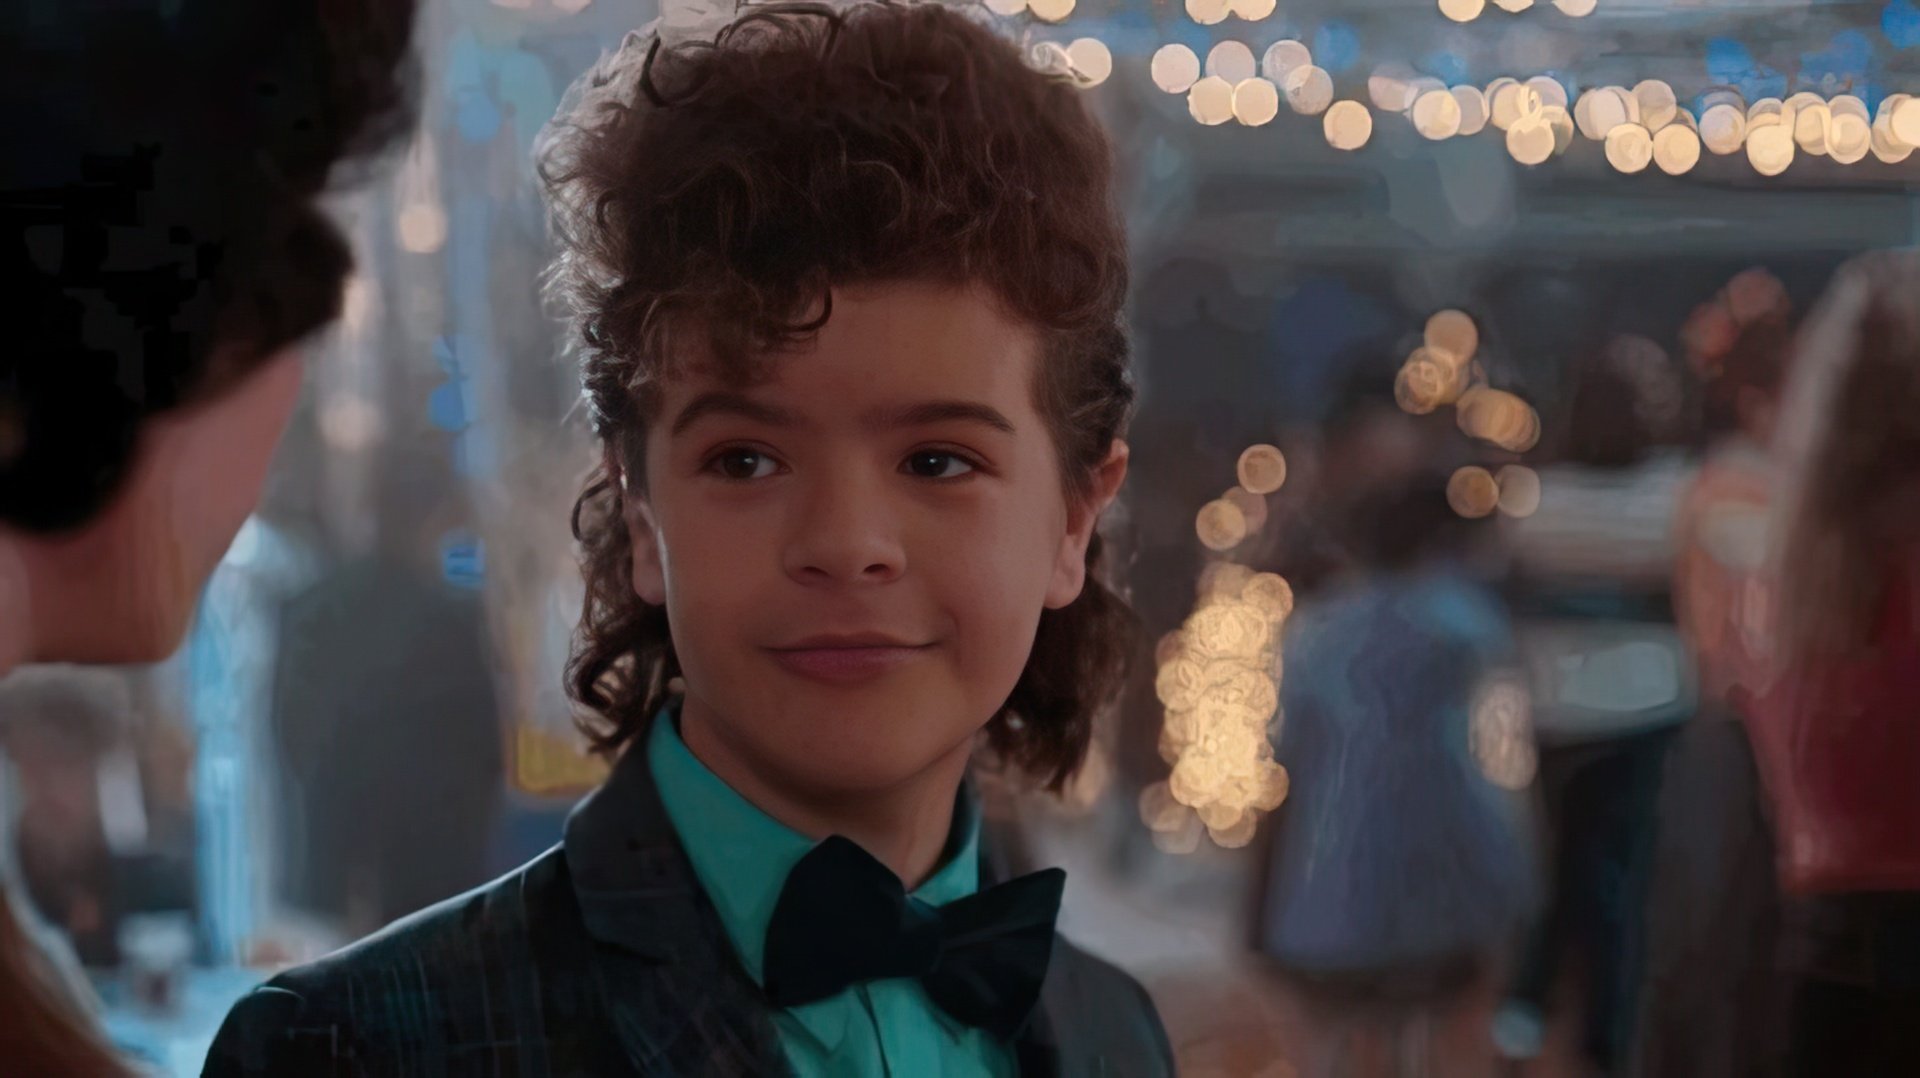 Gaten changed with the release of Season 2